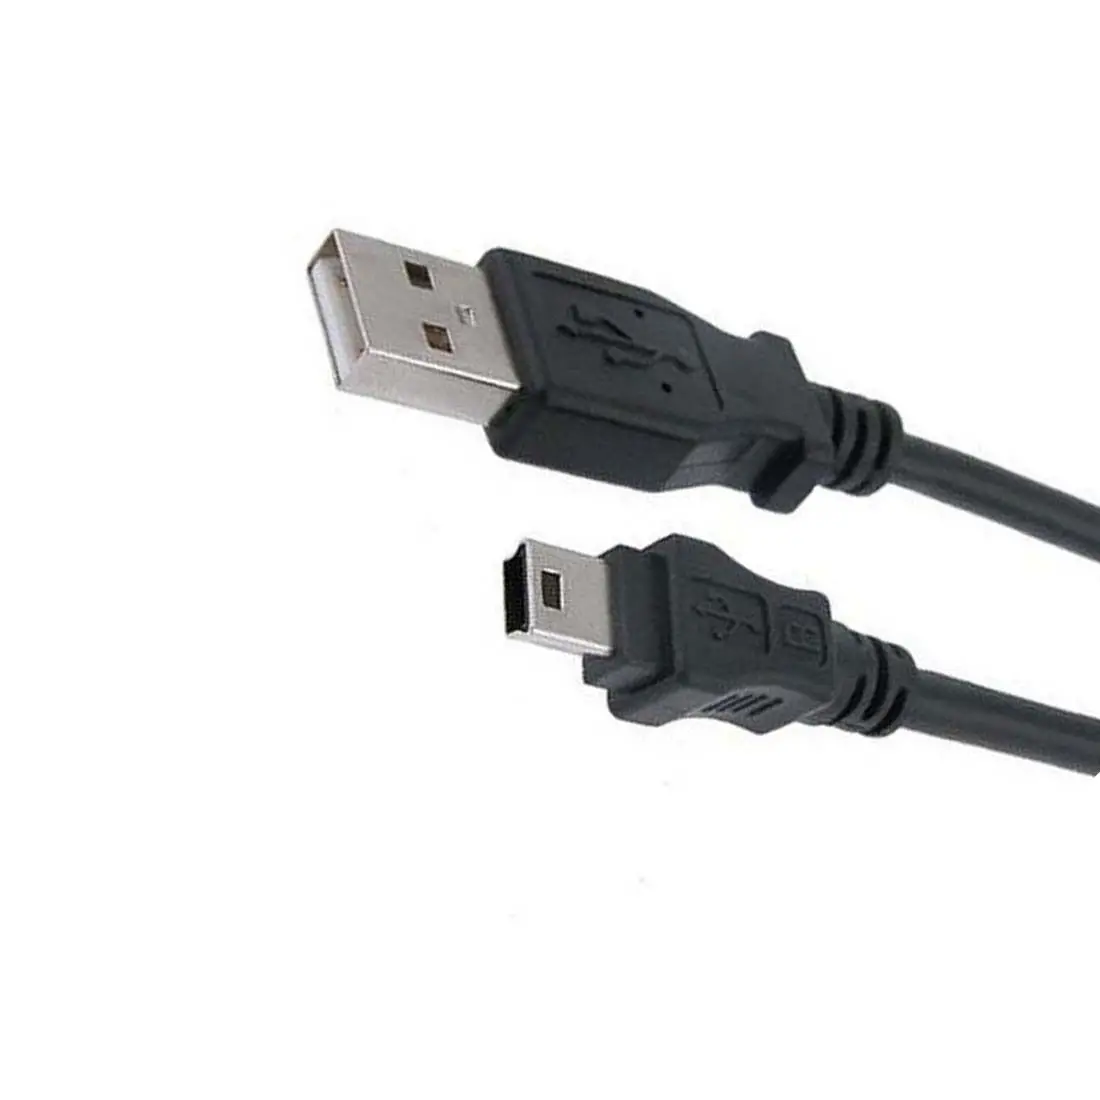 Custom Cable outperforms The Original 5ft Volt Plus Tech PRO MiniUSB 2.0 Cable Works for Tomtom Go 920T with Full Charging and Data Transfer